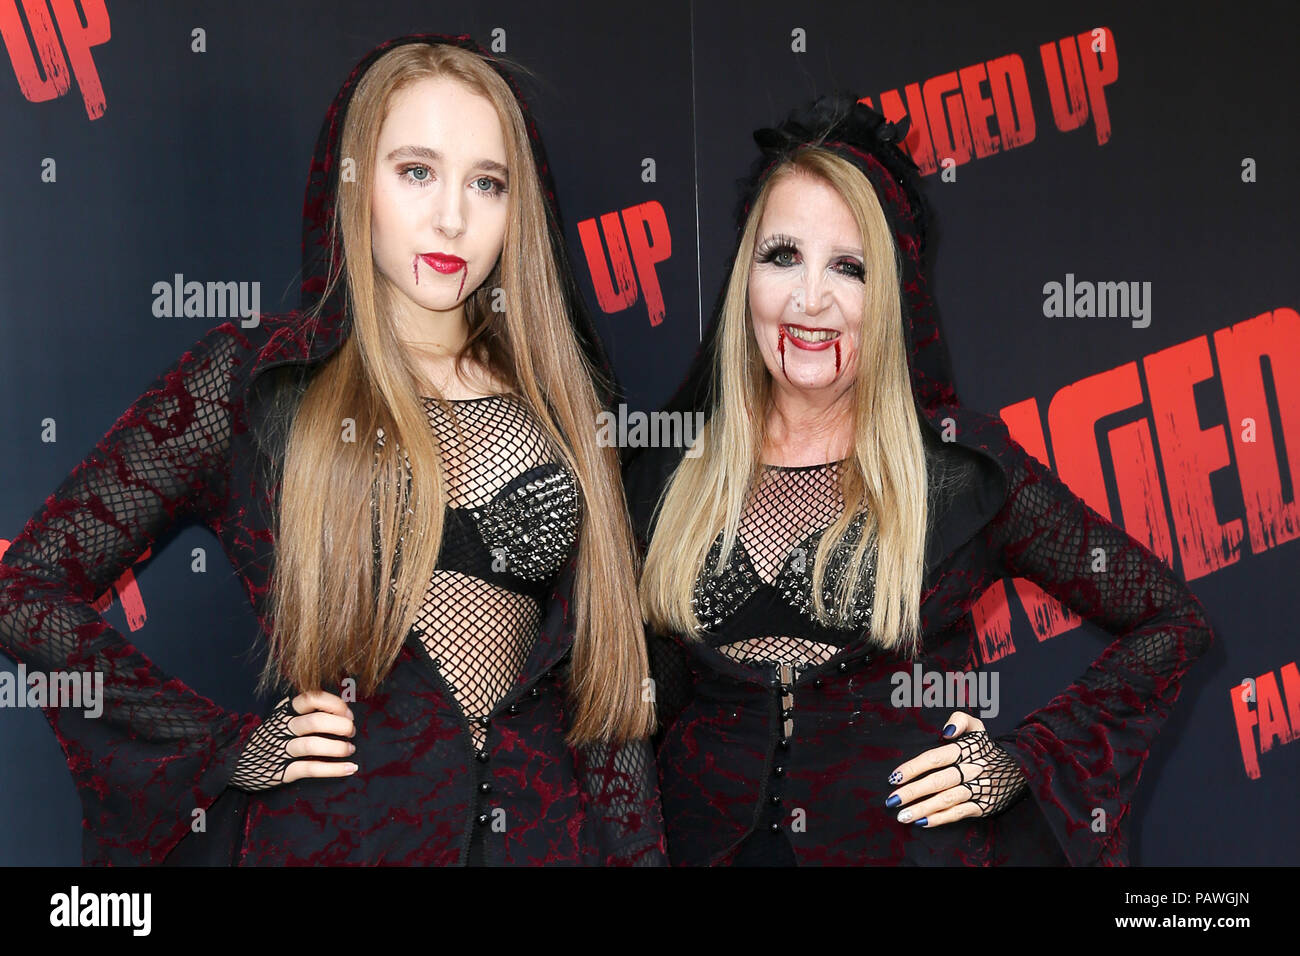 London, UK. 25th July, 2018. Afton McKeith, Gillian McKeith attends the UK Premiere of 'Fanged Up' held at the Prince Charles Cinema Credit: Mario Mitsis/Alamy Live News Stock Photo